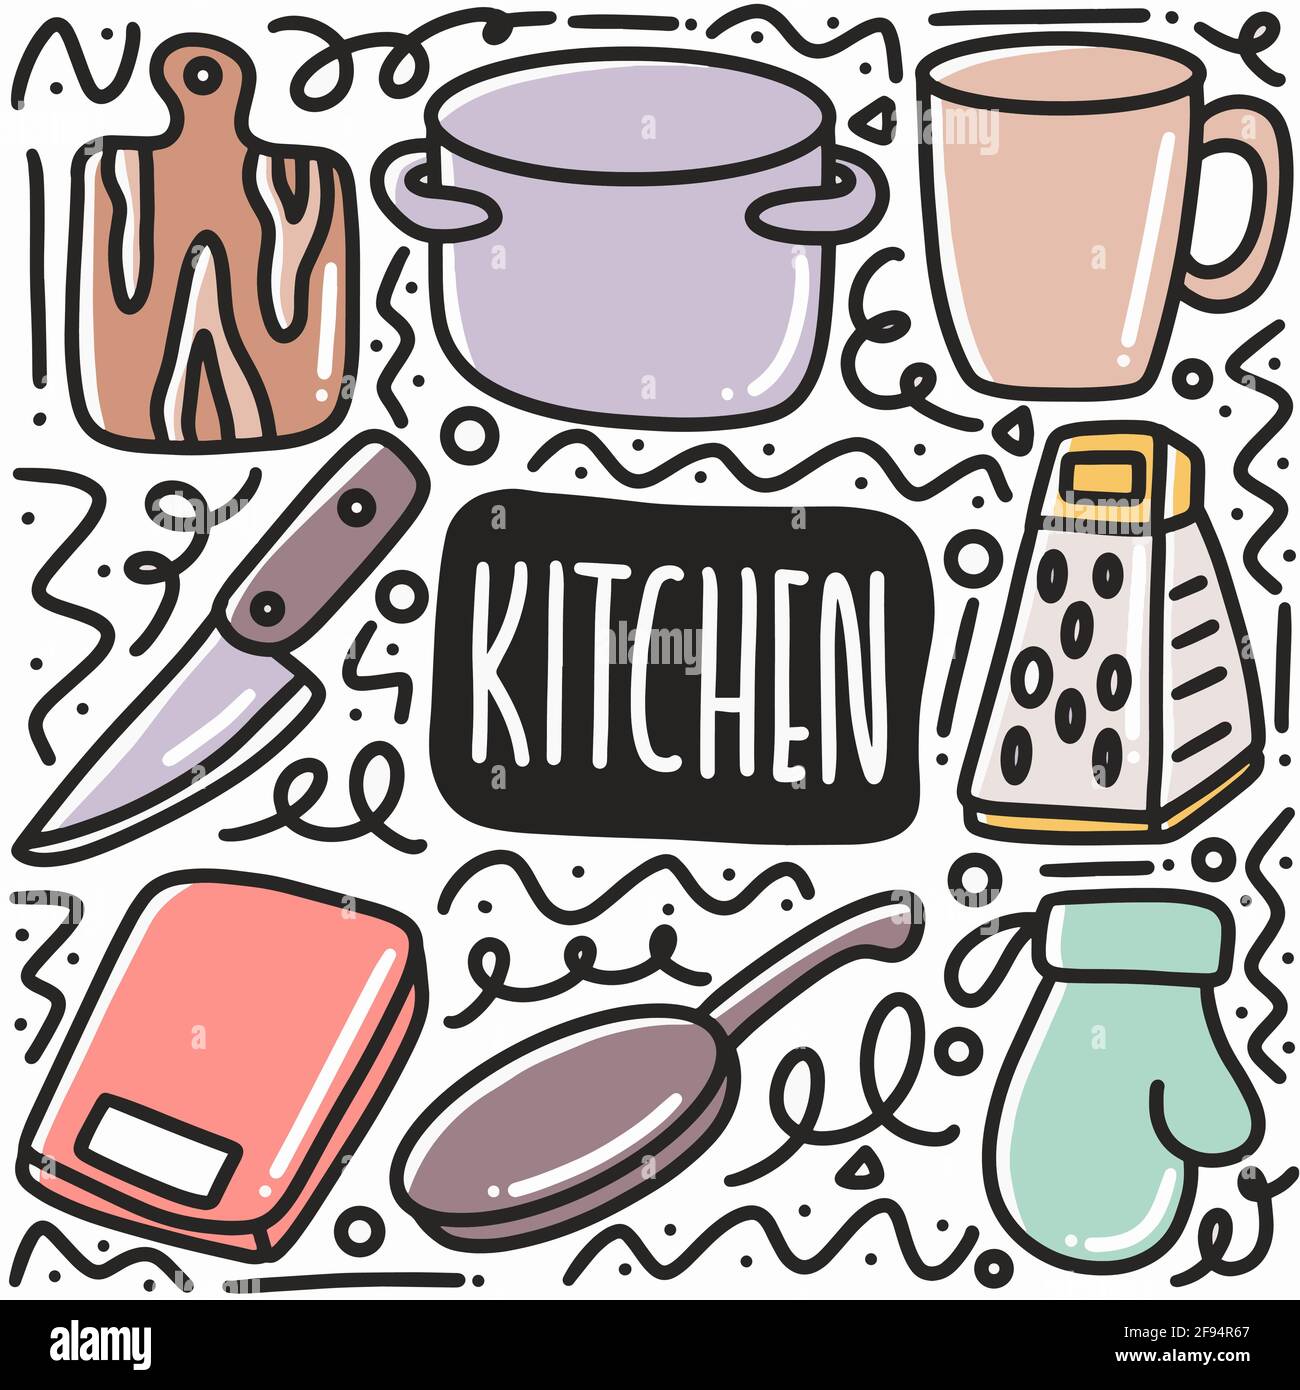 Set with kitchen utensil and appliance. Scandinavian illustration of kitchen  elements in flat style. Funny cartoon texture with hand drawn food  preparation and kitchenware. Vector doodle clipart. Stock Vector by ©Monash  412159158